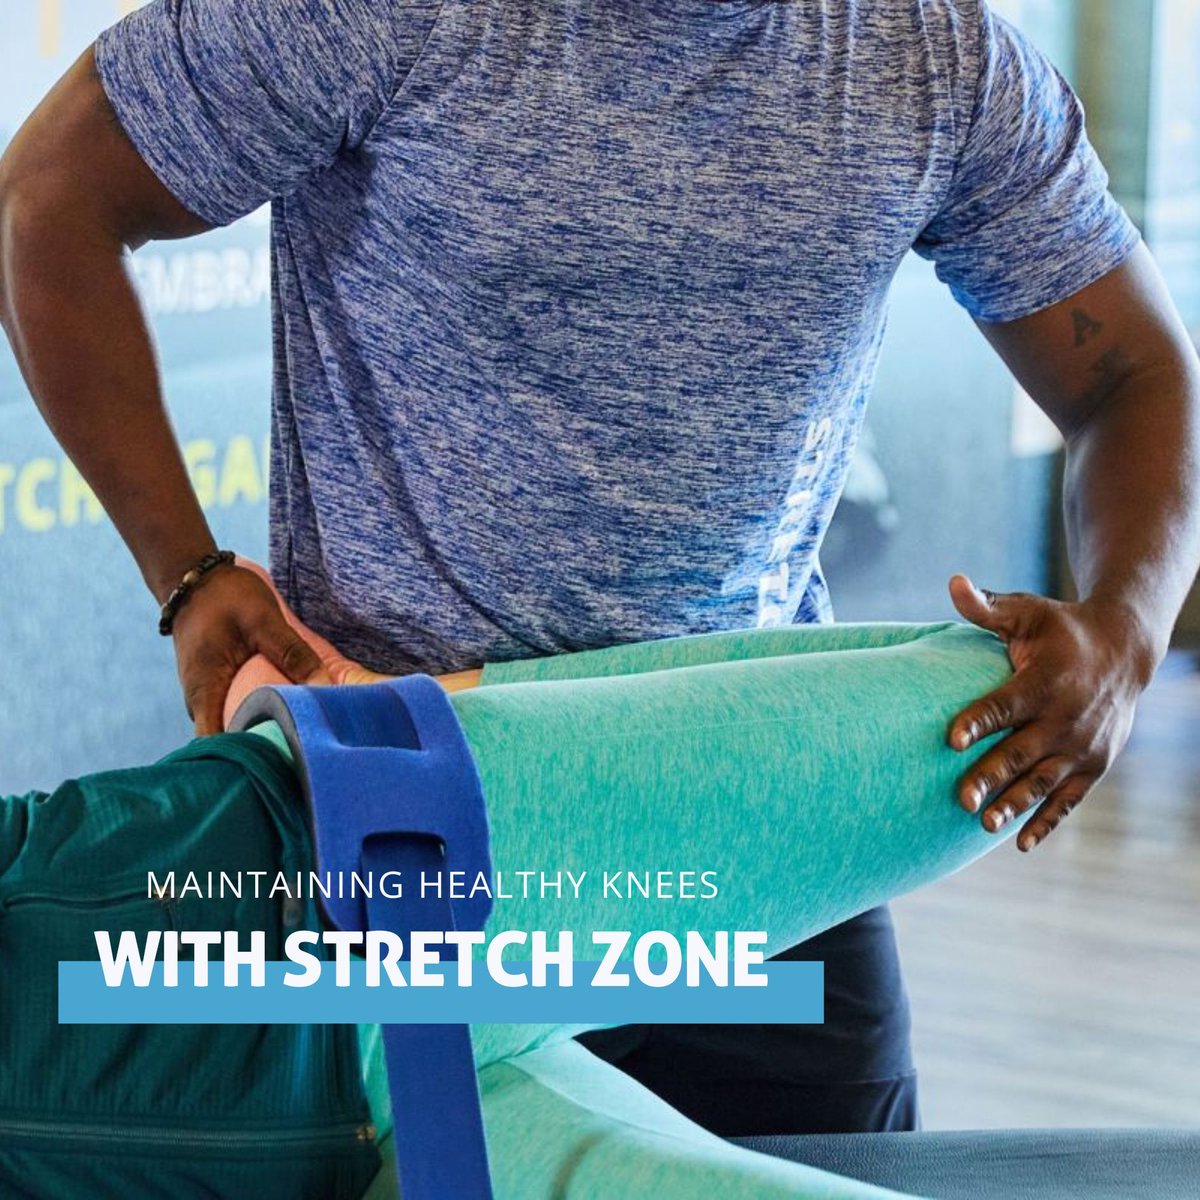 Our practitioner-assisted stretching sessions are designed to enhance flexibility, alleviate tension, and support overall joint health.
Book now, your first session is on us!👍
.
.
.
#wellnessmindset #stretchtime #dailyencouragement #lifeisanadventure #takecare...